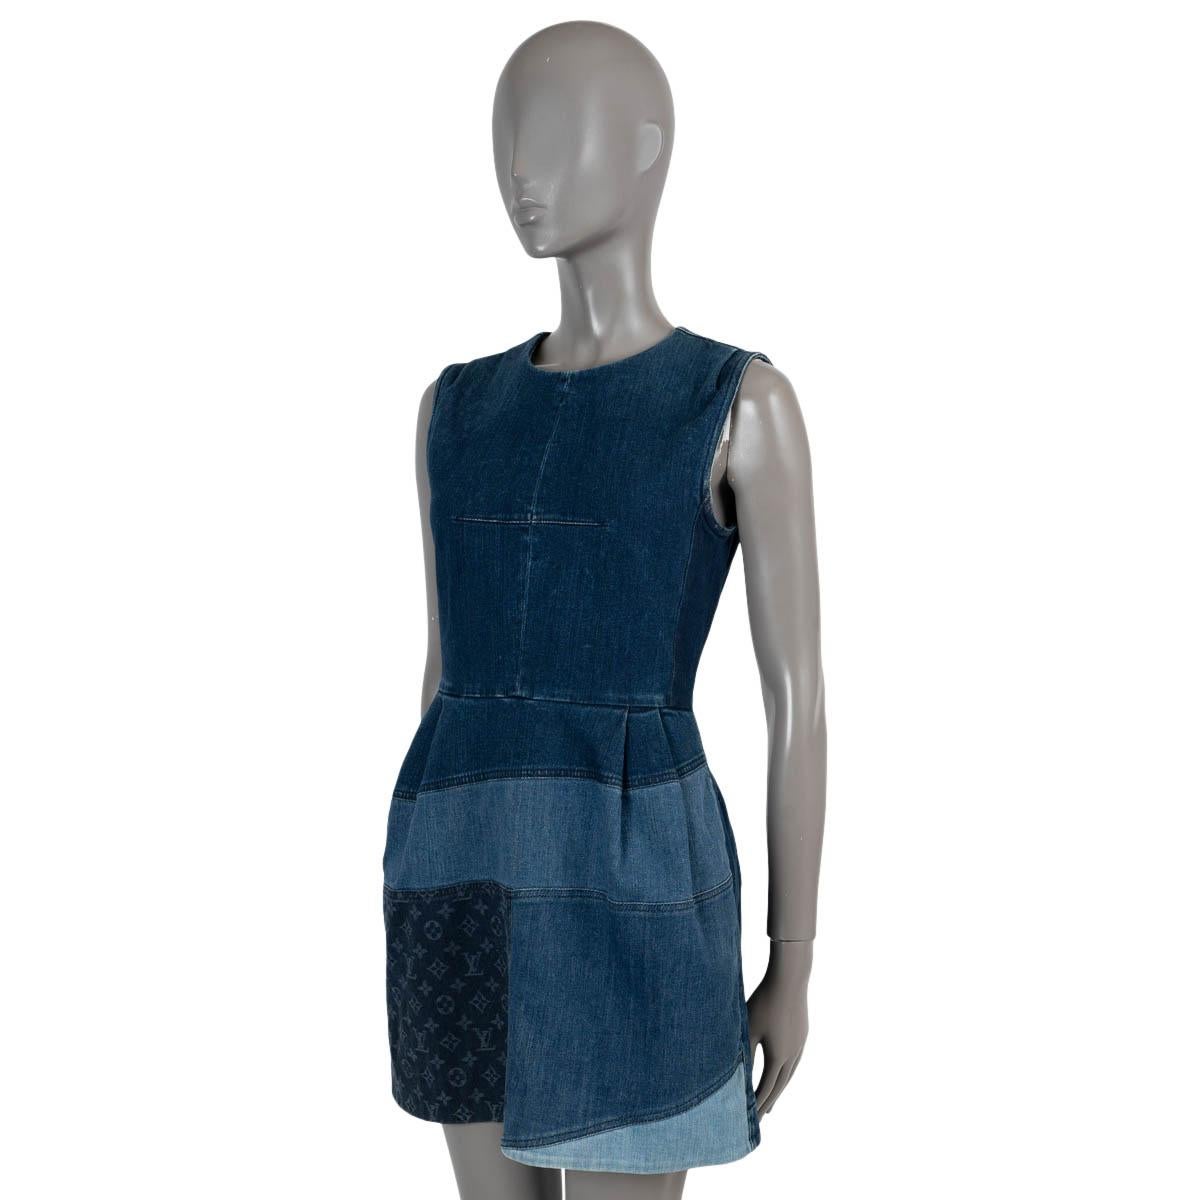 100% authentic Louis Vuitton sleeveless patchwork denim dress in indigo blue cotton (98%) and (2%) elastane. Features two side pockets. Opens with a gold-tone zipper in the back. Unlined. Has been worn and is in excellent condition.

2013